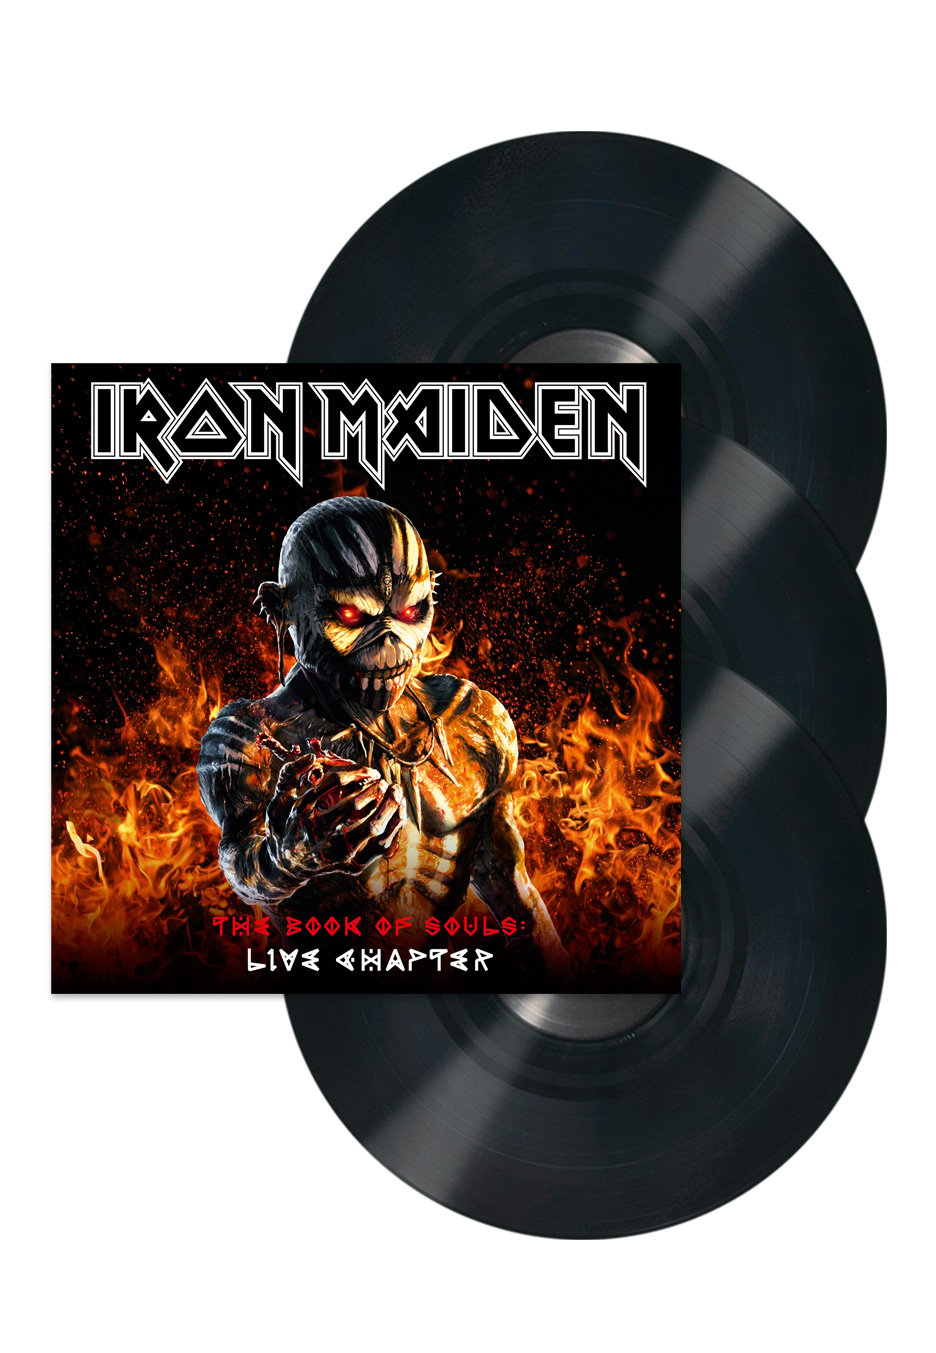 Iron Maiden - The Book Of Souls: Live Chapter - 3 Vinyl